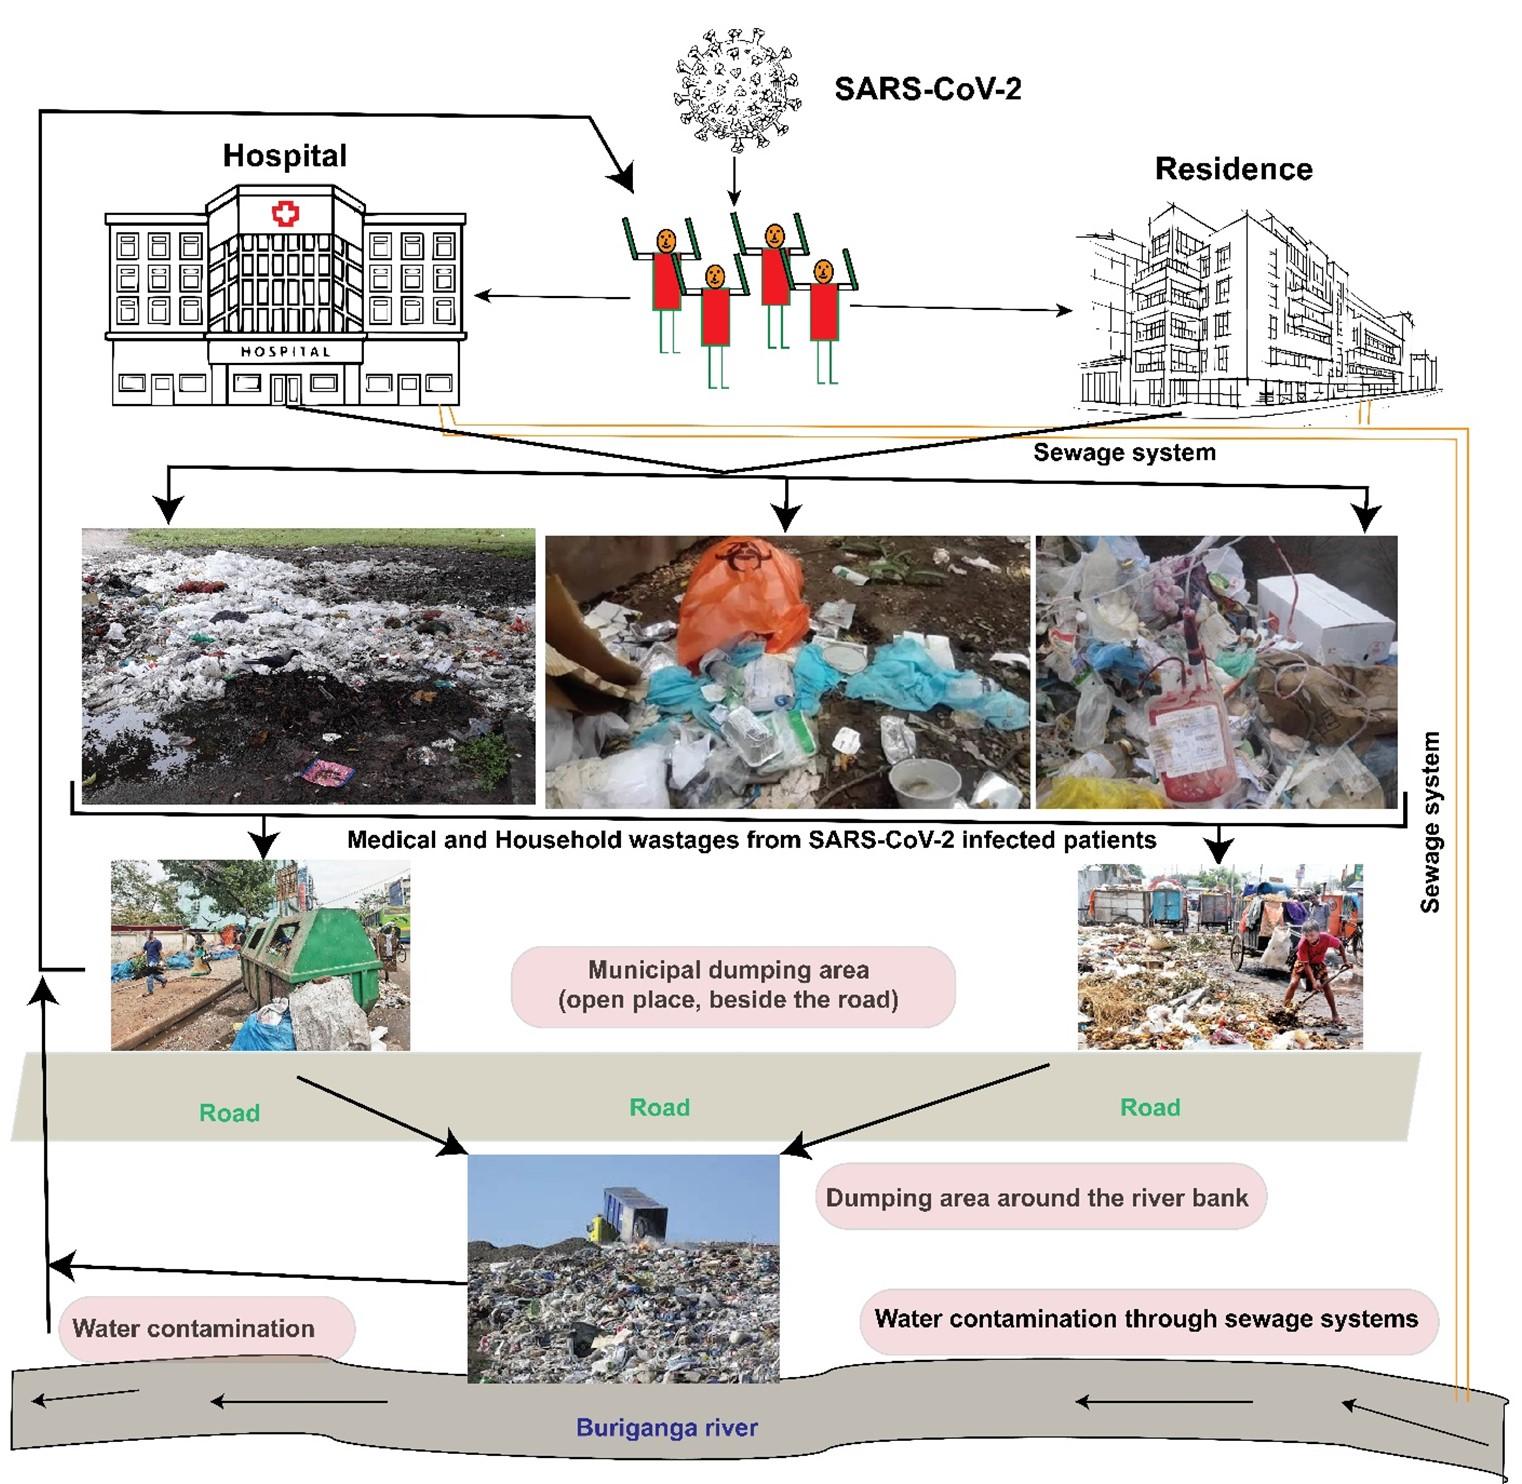 Challenges in medical waste management amid COVID-19 pandemic in a megacity Dhaka